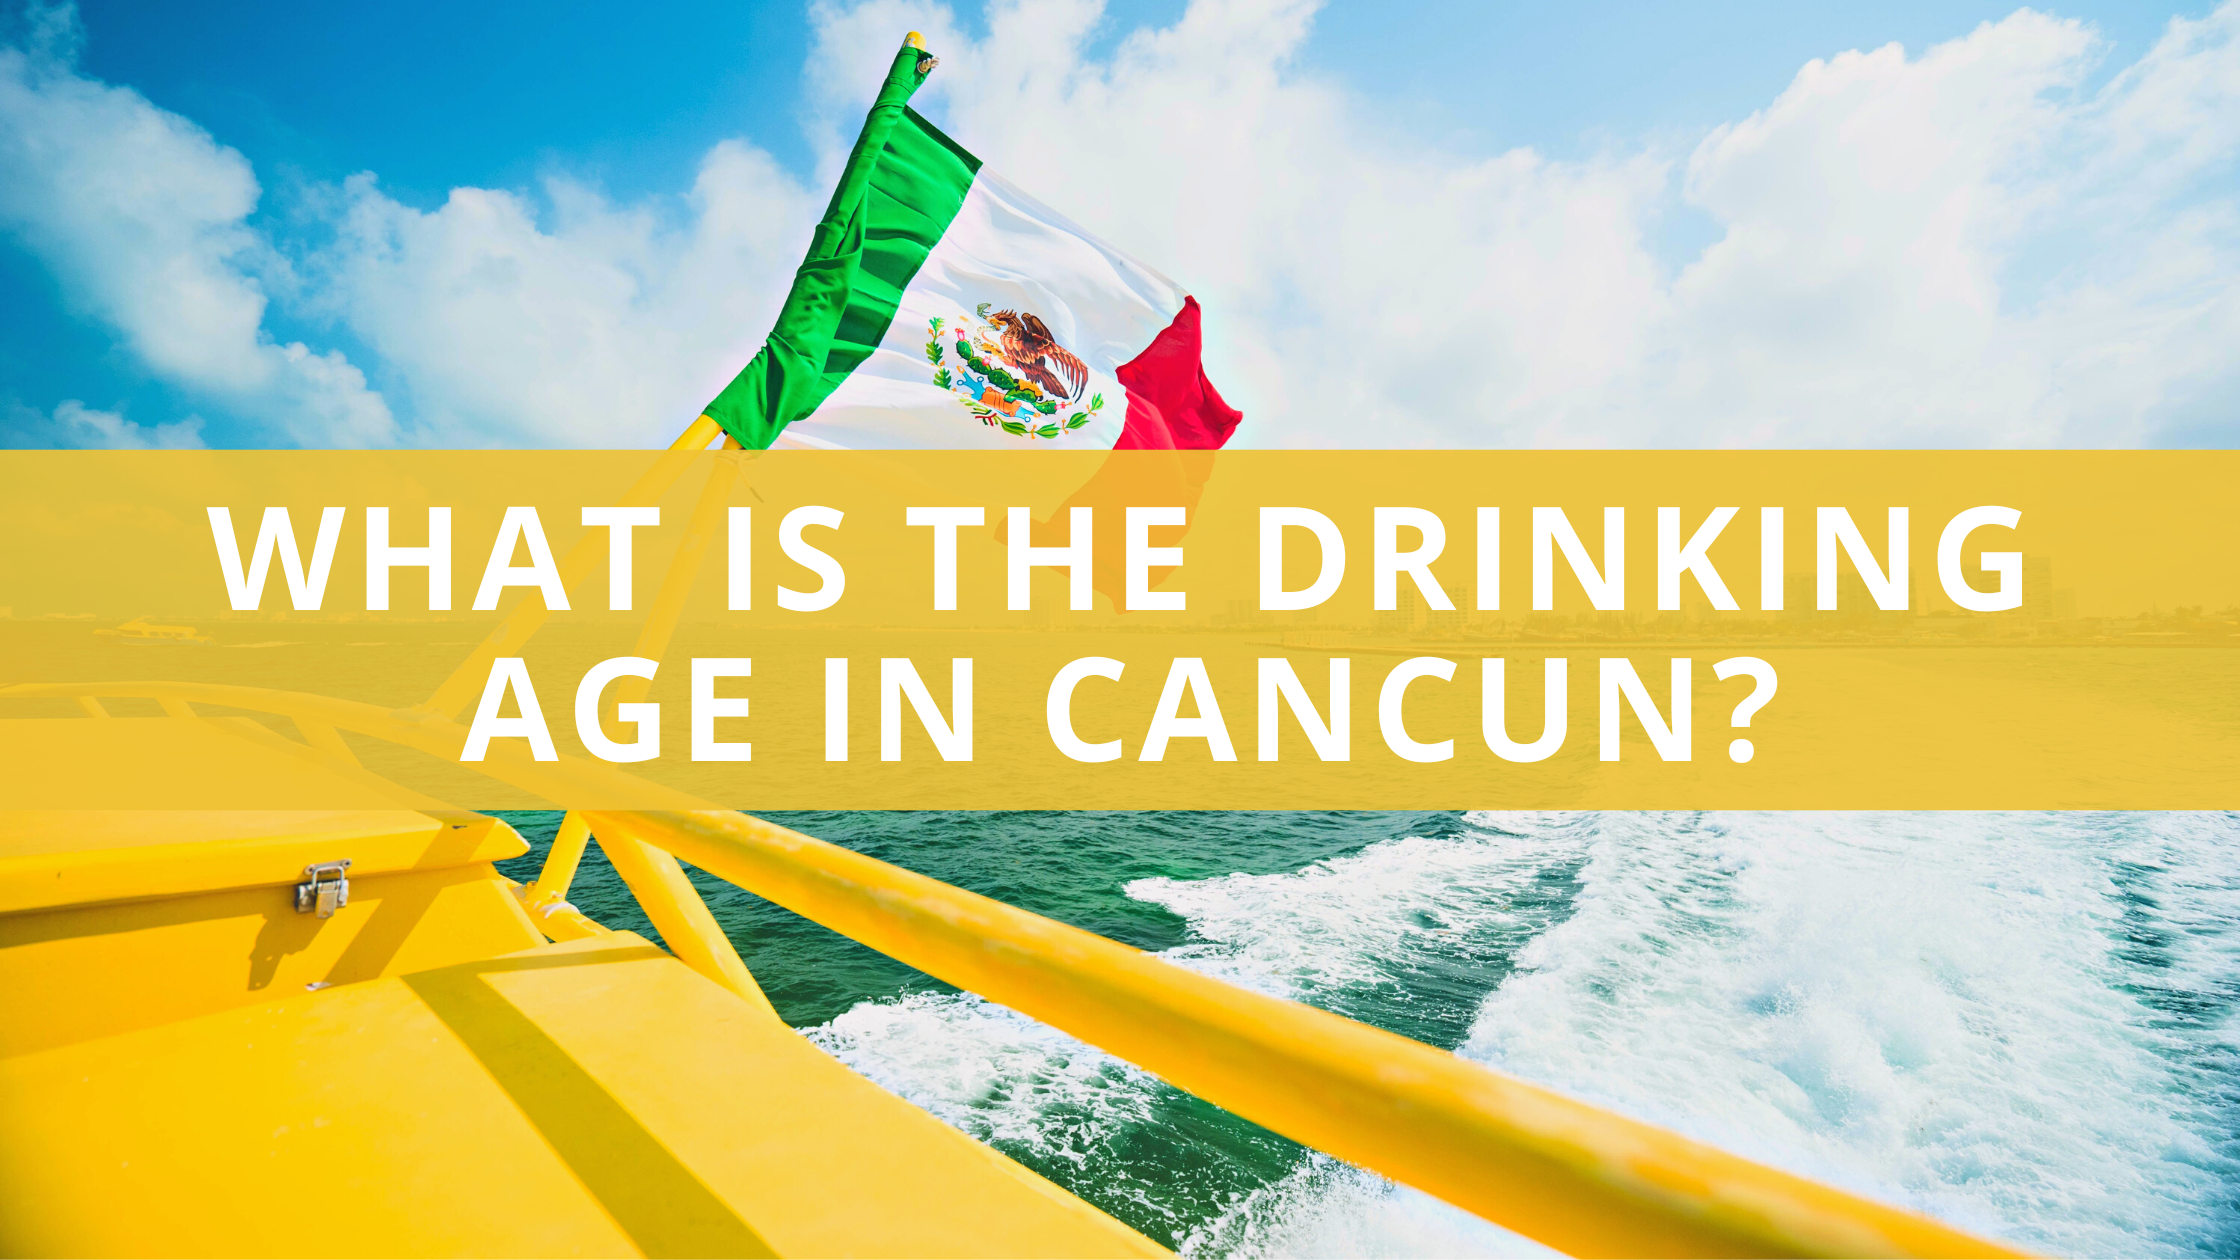 What Is the Drinking Age in Cancun